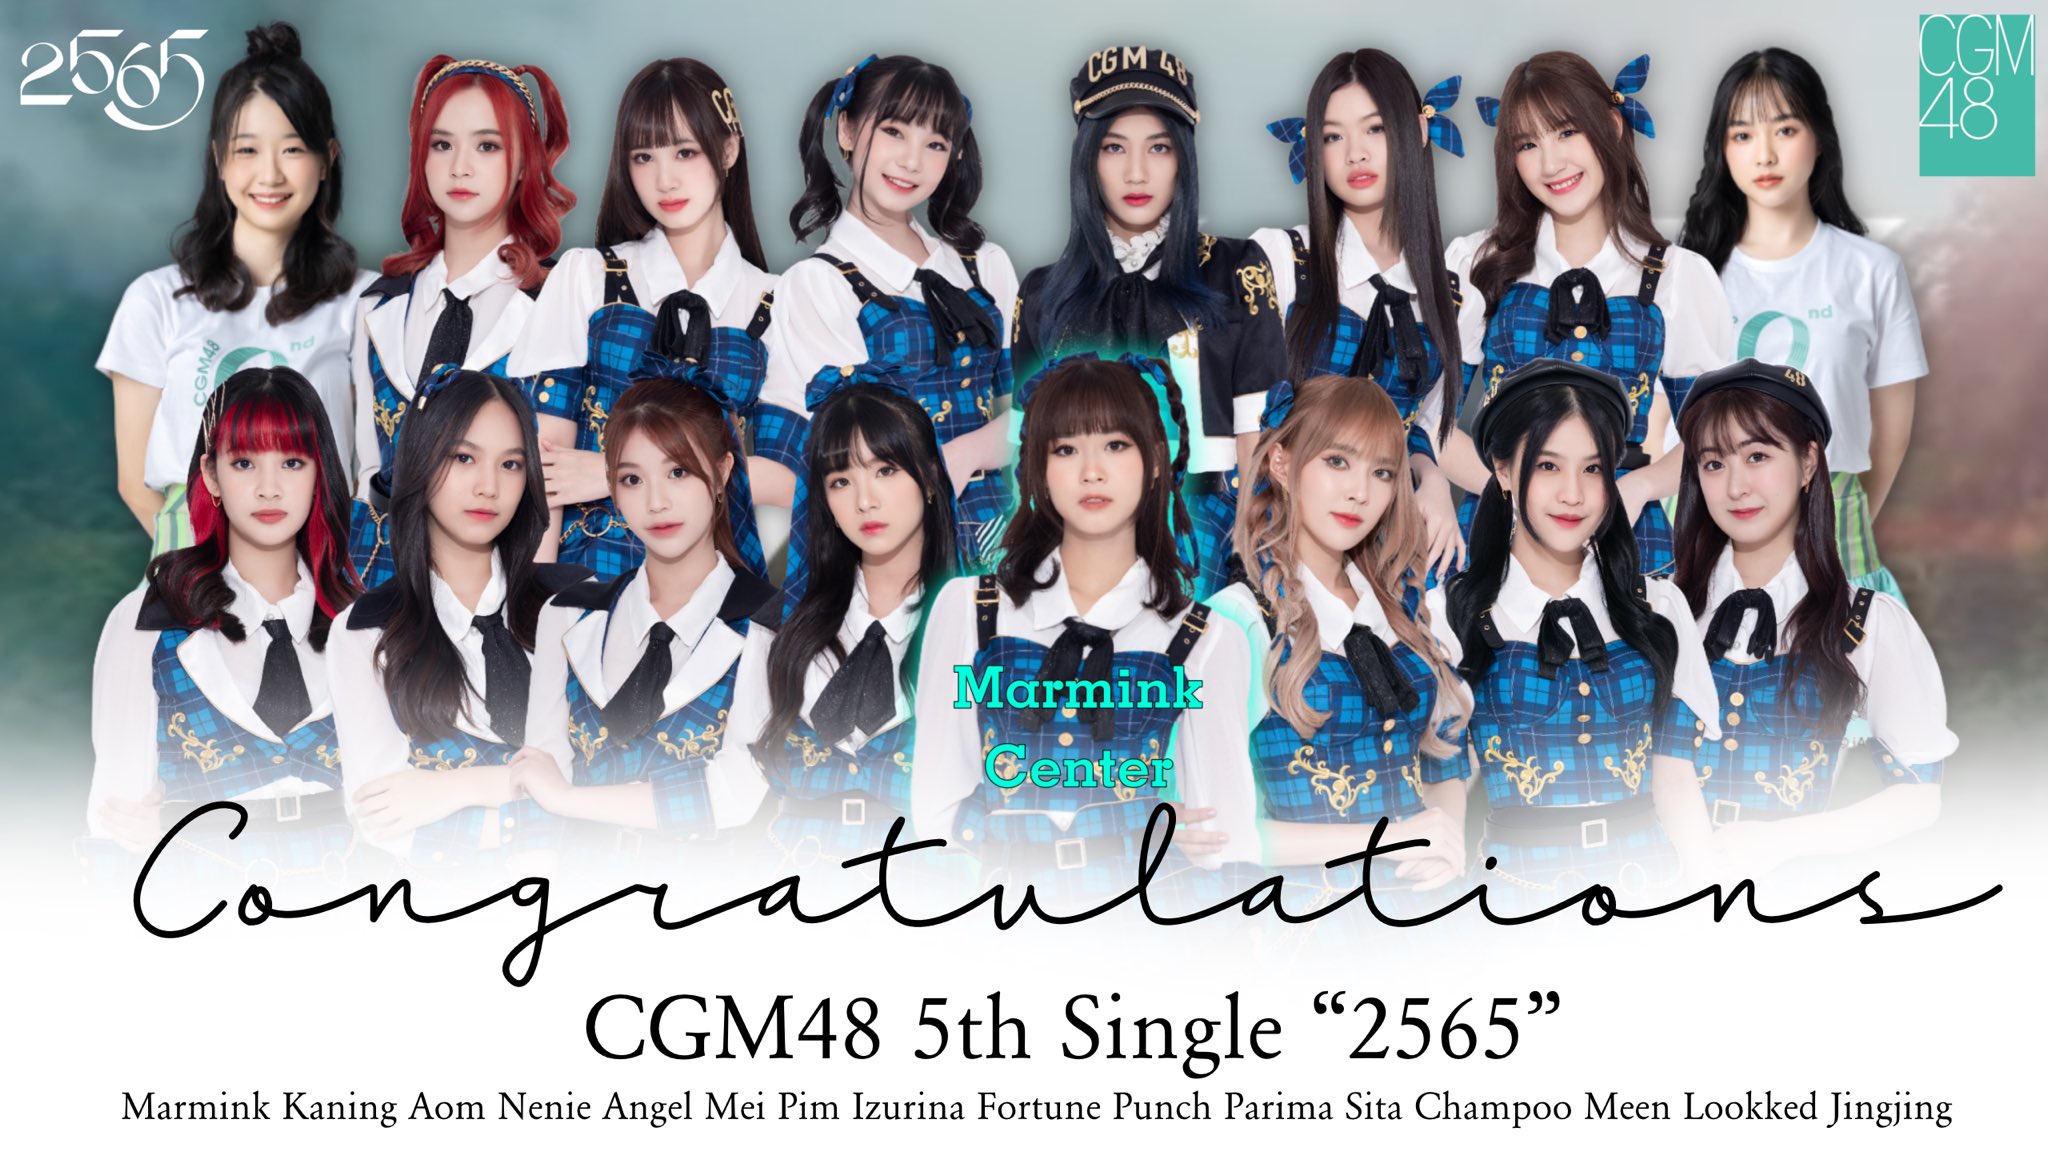 Details on CGM48 5th and Original Single "2565"